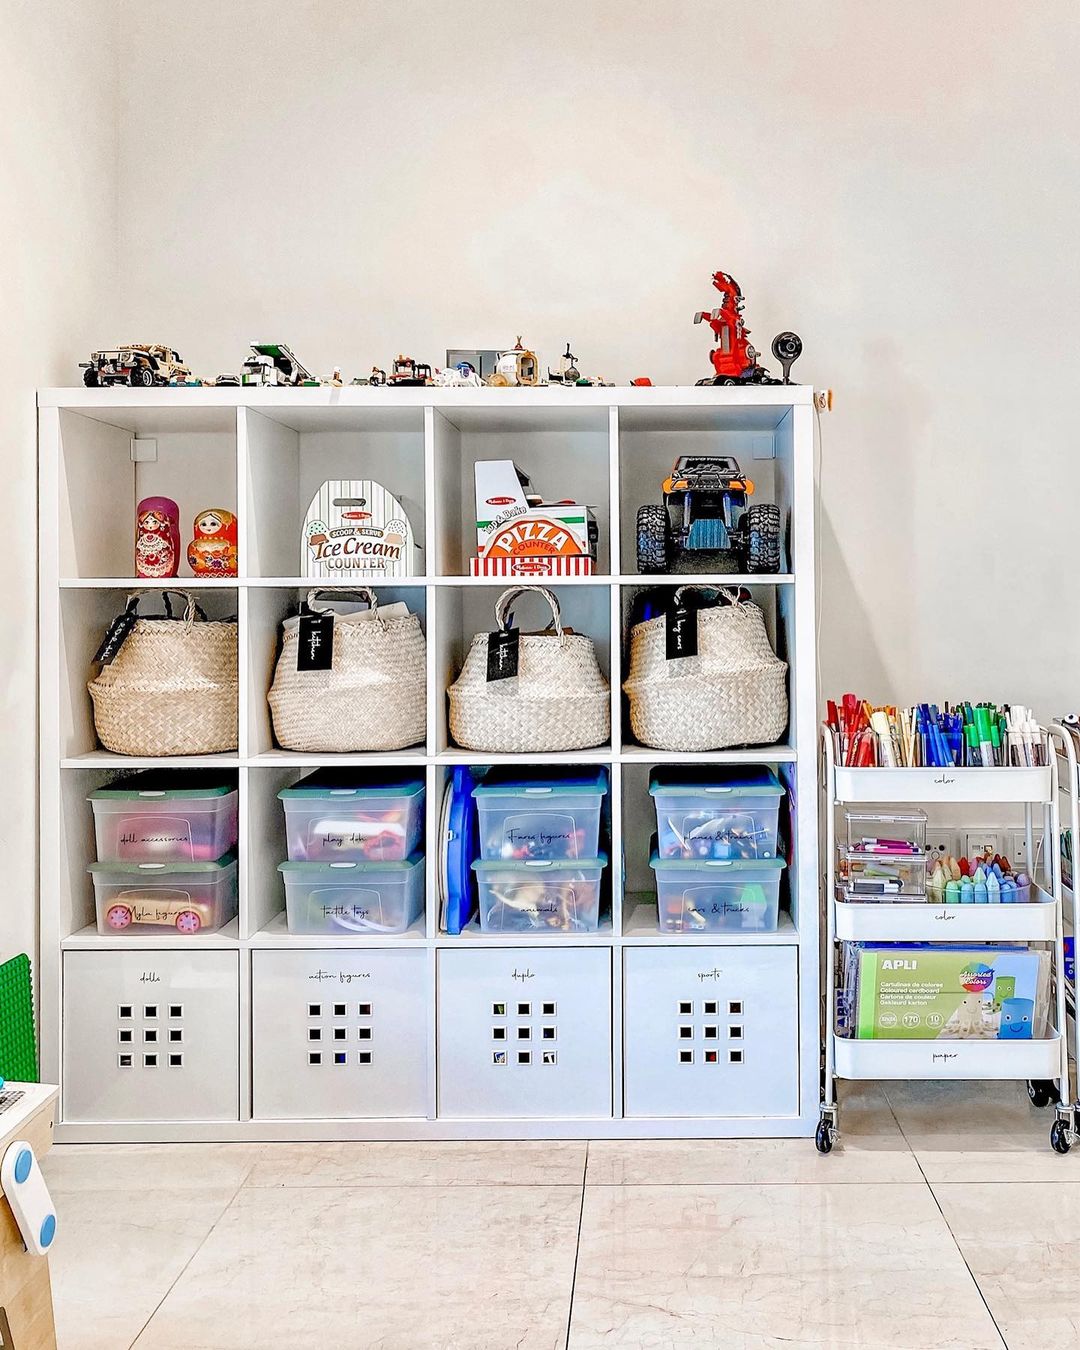 https://www.extraspace.com/blog/wp-content/uploads/2018/01/small-kids-room-ideas-keep-some-toys-out-of-reach.jpeg